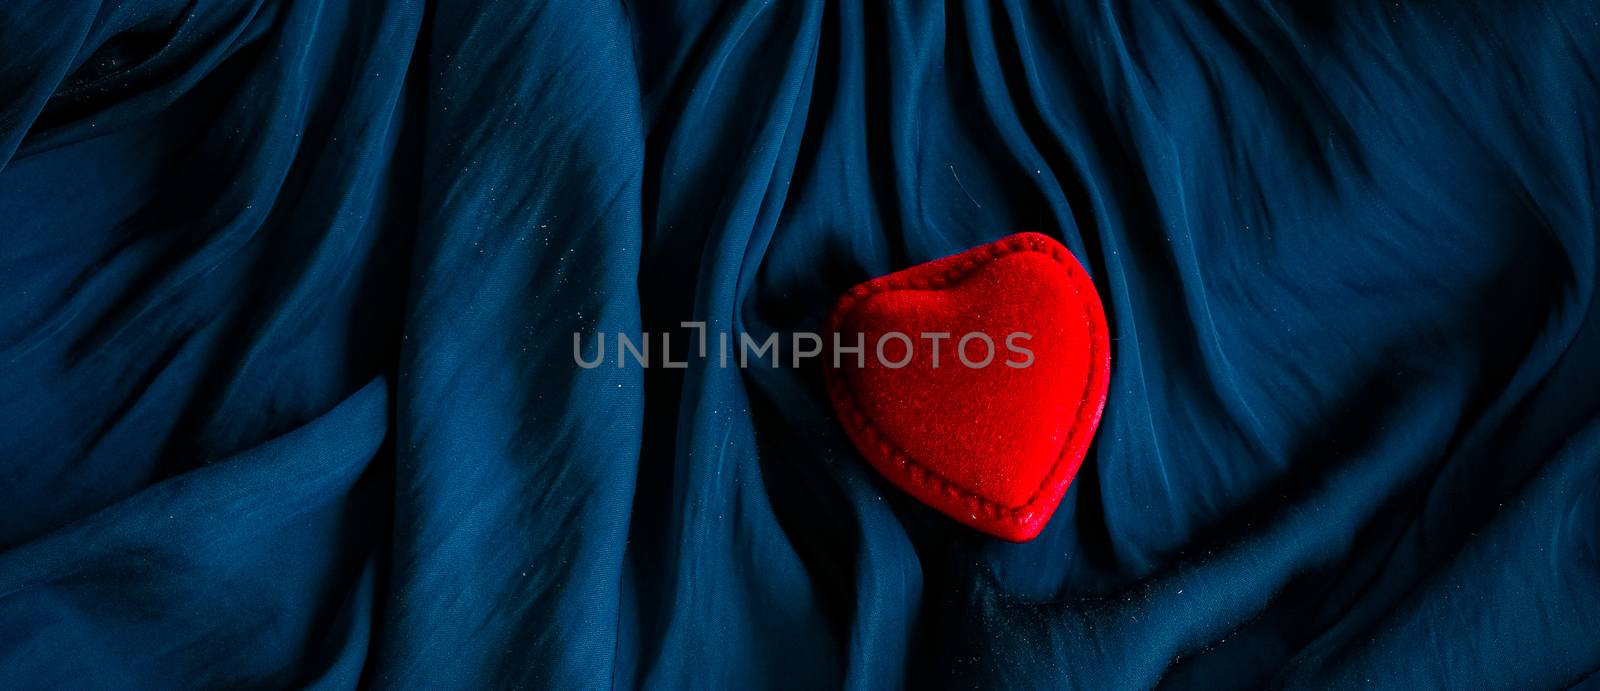 Romance, surprise and holidays concept - Valentines Day abstract background, heart shaped jewellery gift box on silk backdrop, love dating and engagement romantic present, luxury brand holiday design